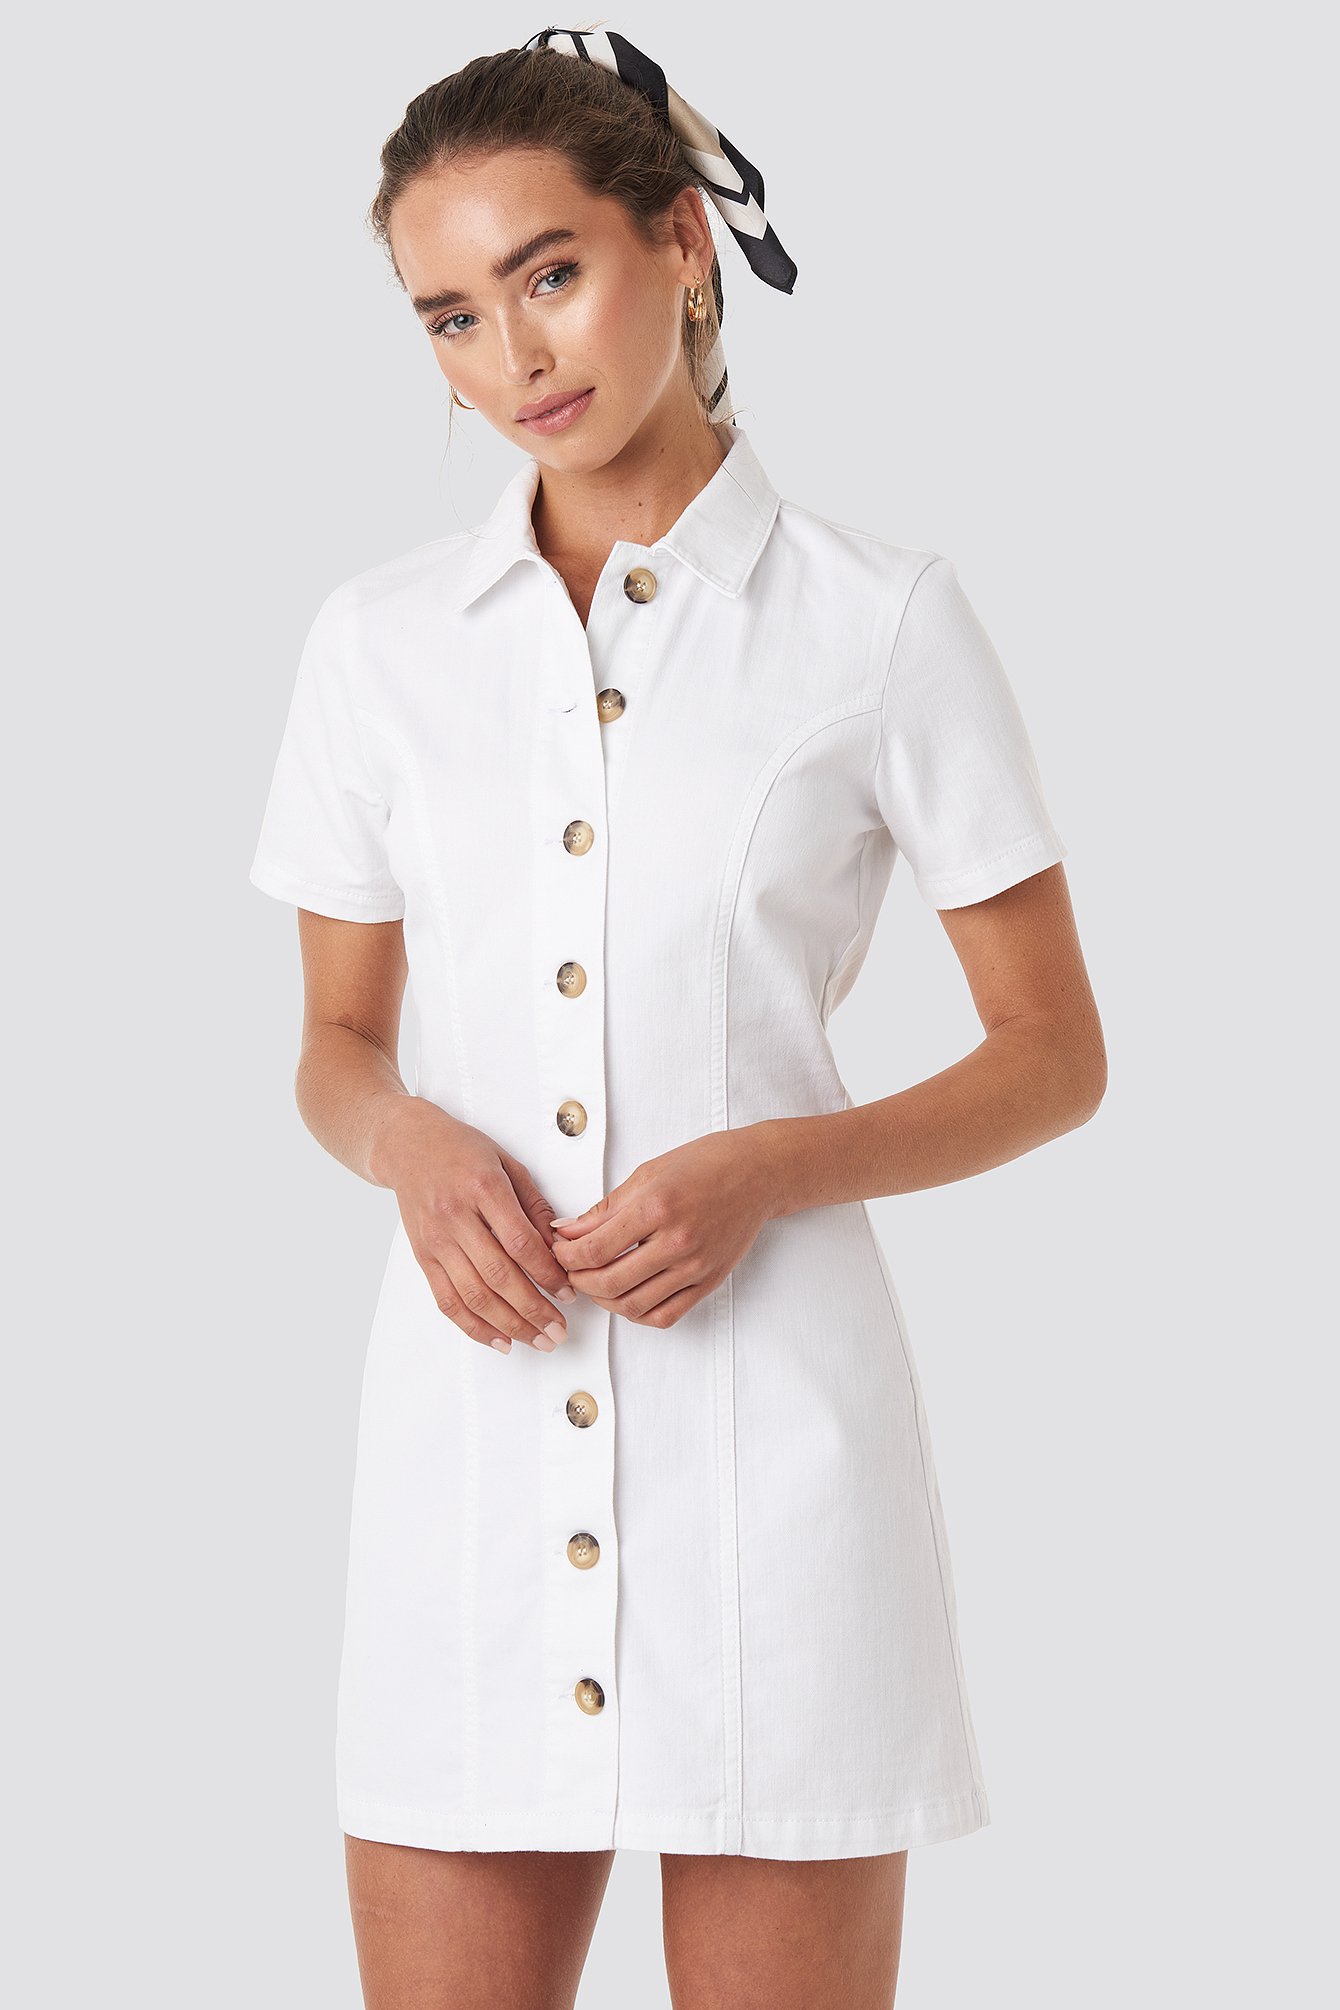 White Button Up Dress Three Dots Button Up Dress In White | Wikwind